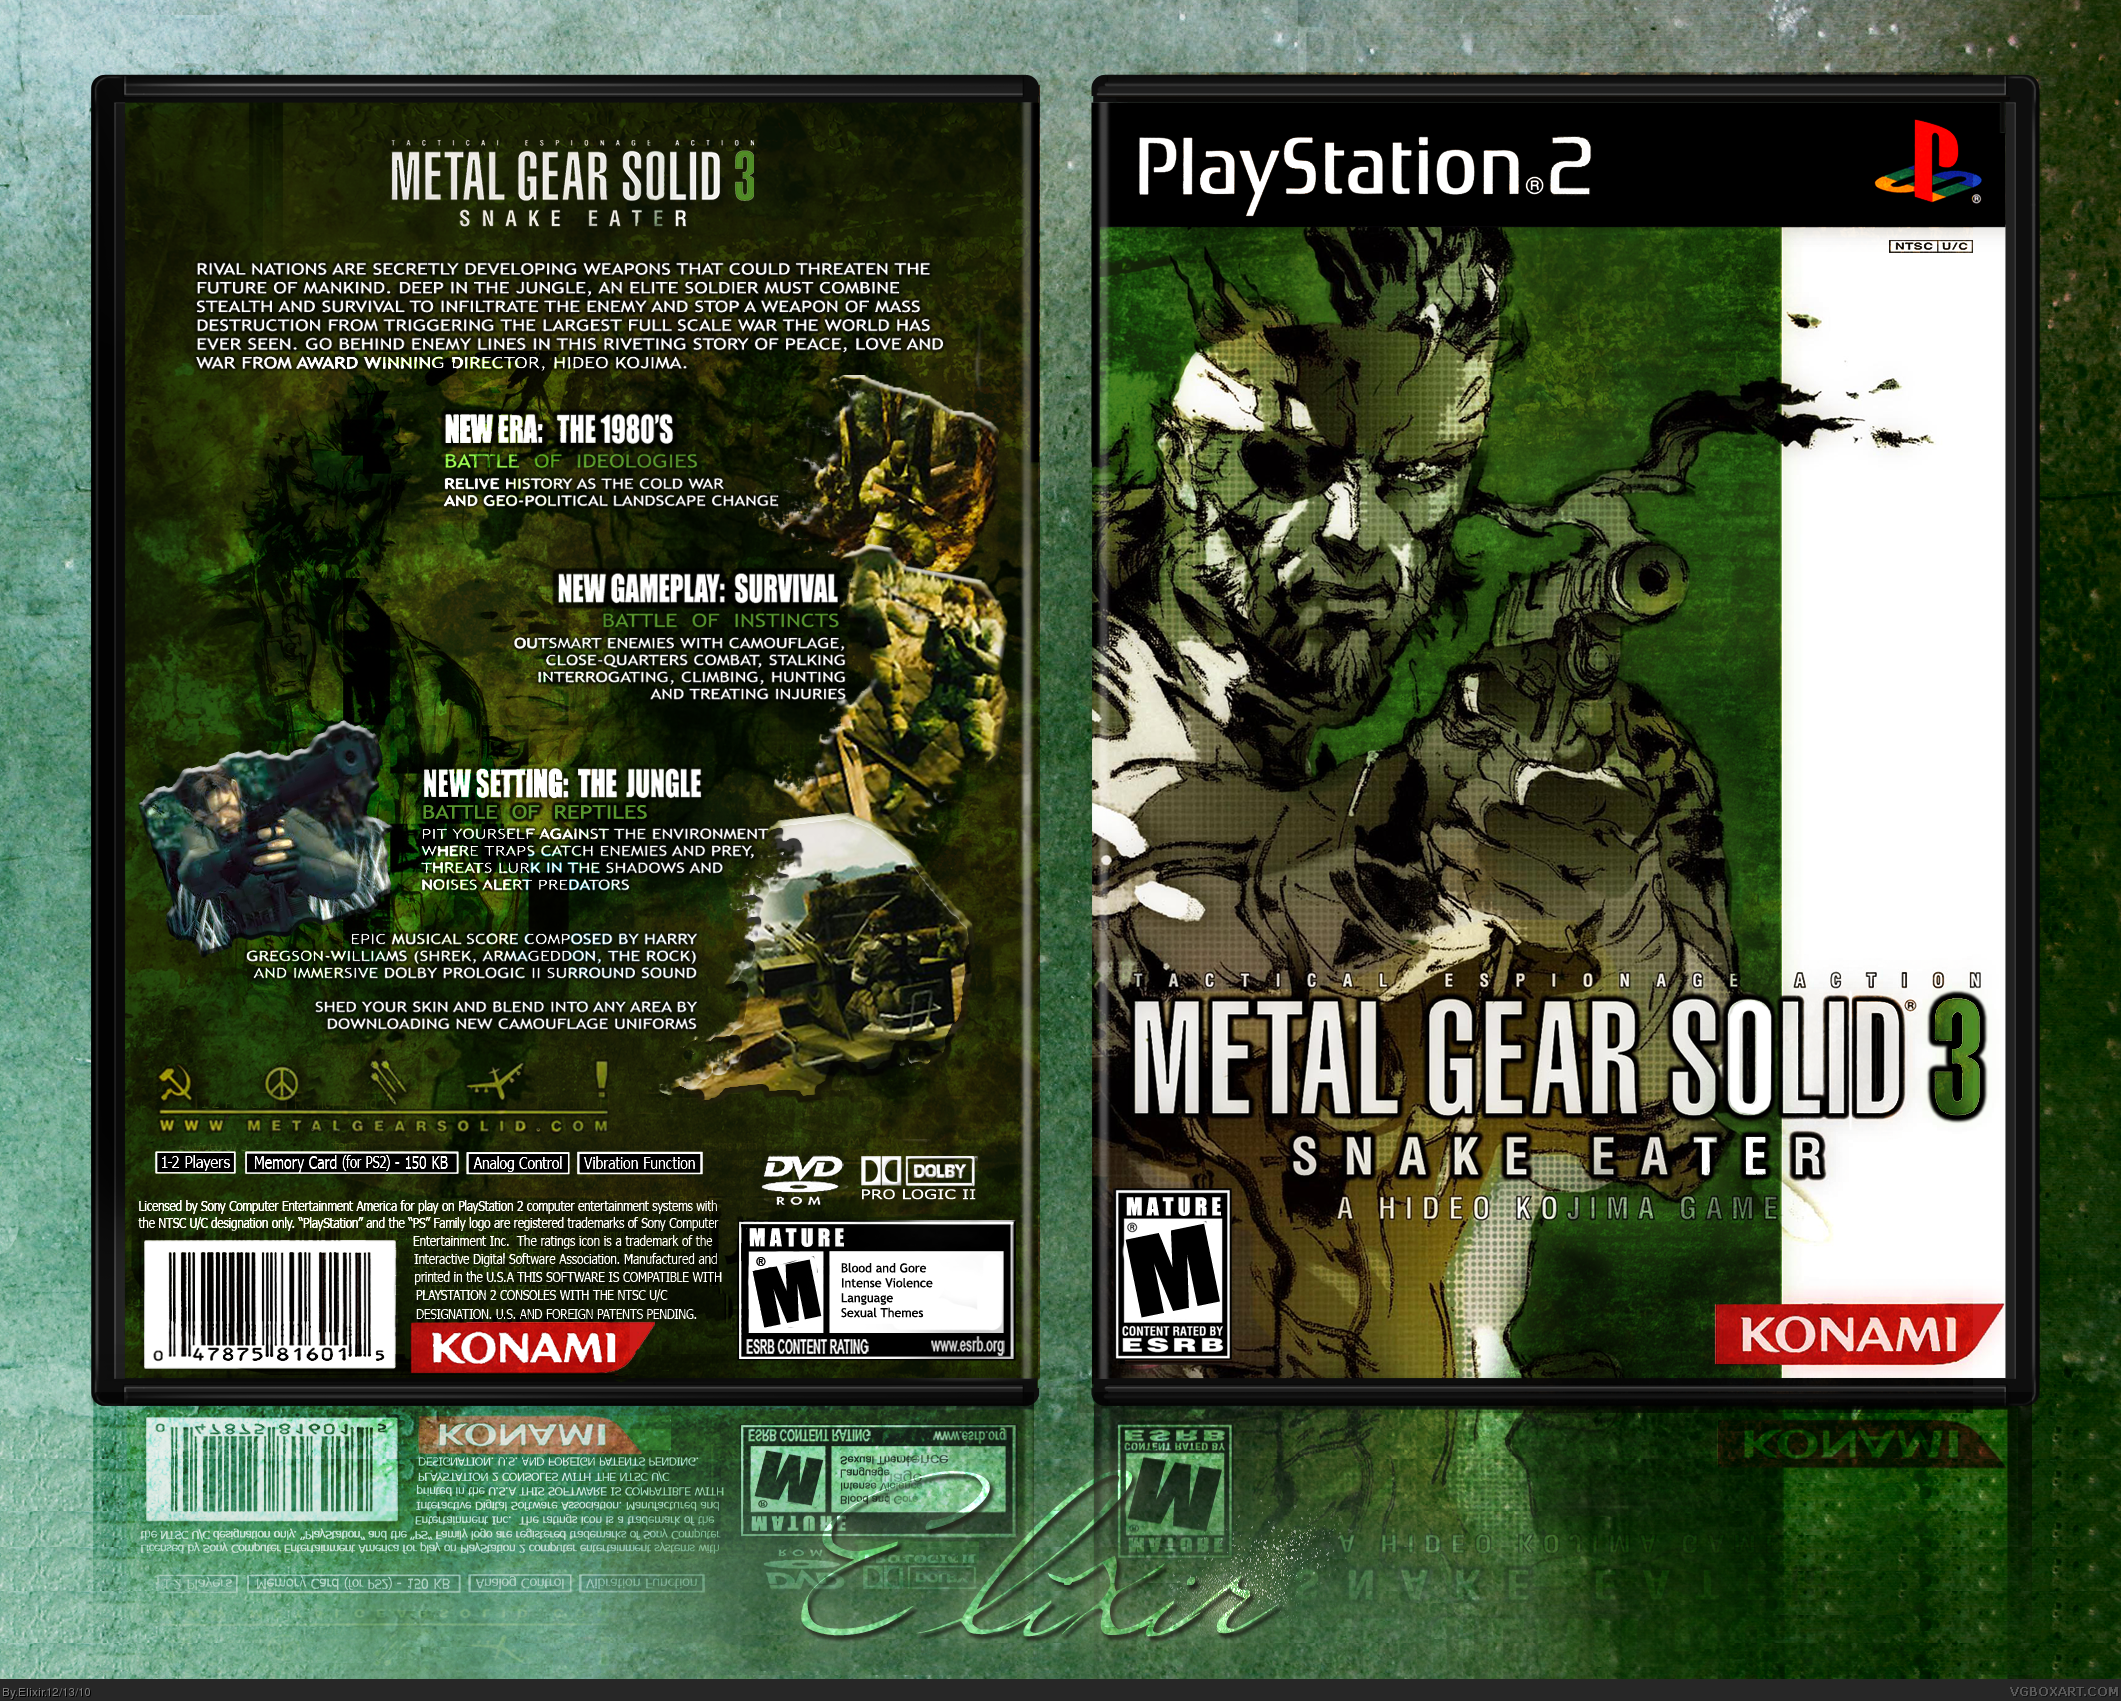 Mgs 3 master collection. Metal Gear Solid 2 ps2 Cover. Metal Gear 3 ps2. Metal Gear Solid 3 ps2 обложка. Metal Gear Solid PLAYSTATION 2.